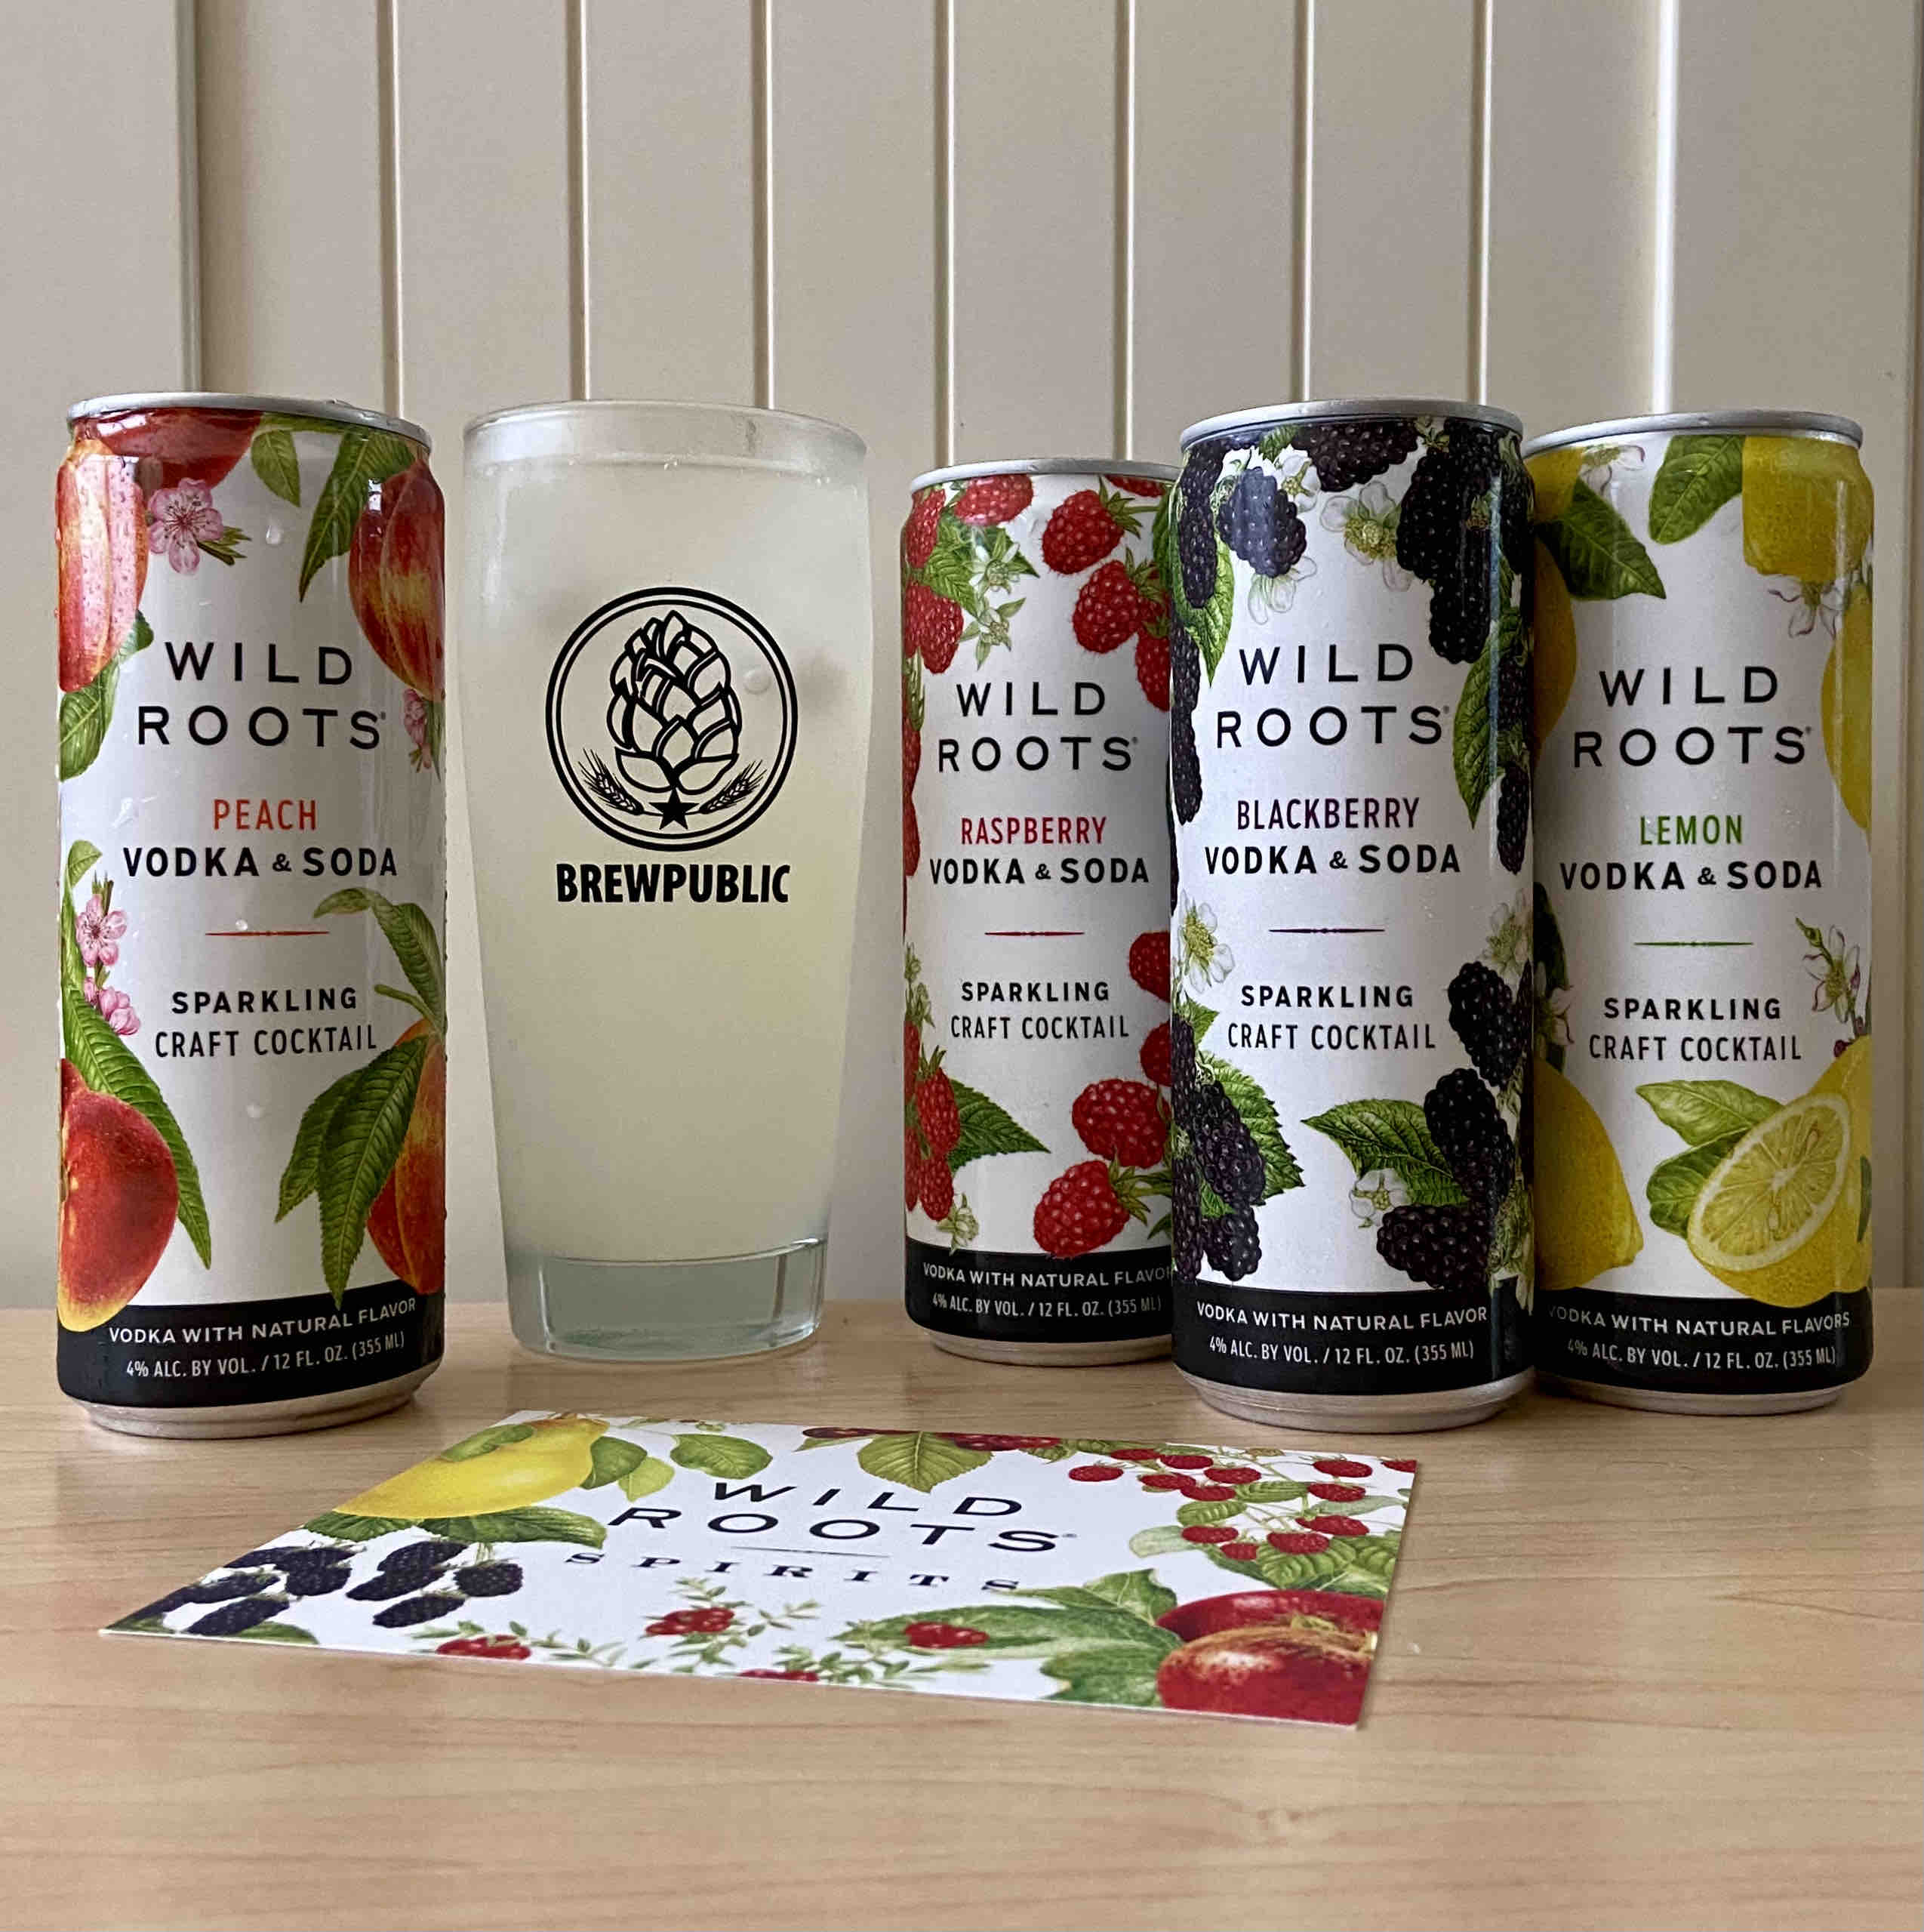 Wild Roots Launches Vodka & Soda Sparkling Canned Craft Cocktails in four flavors – Peach, Raspberry, Blackberry, and Lemon.